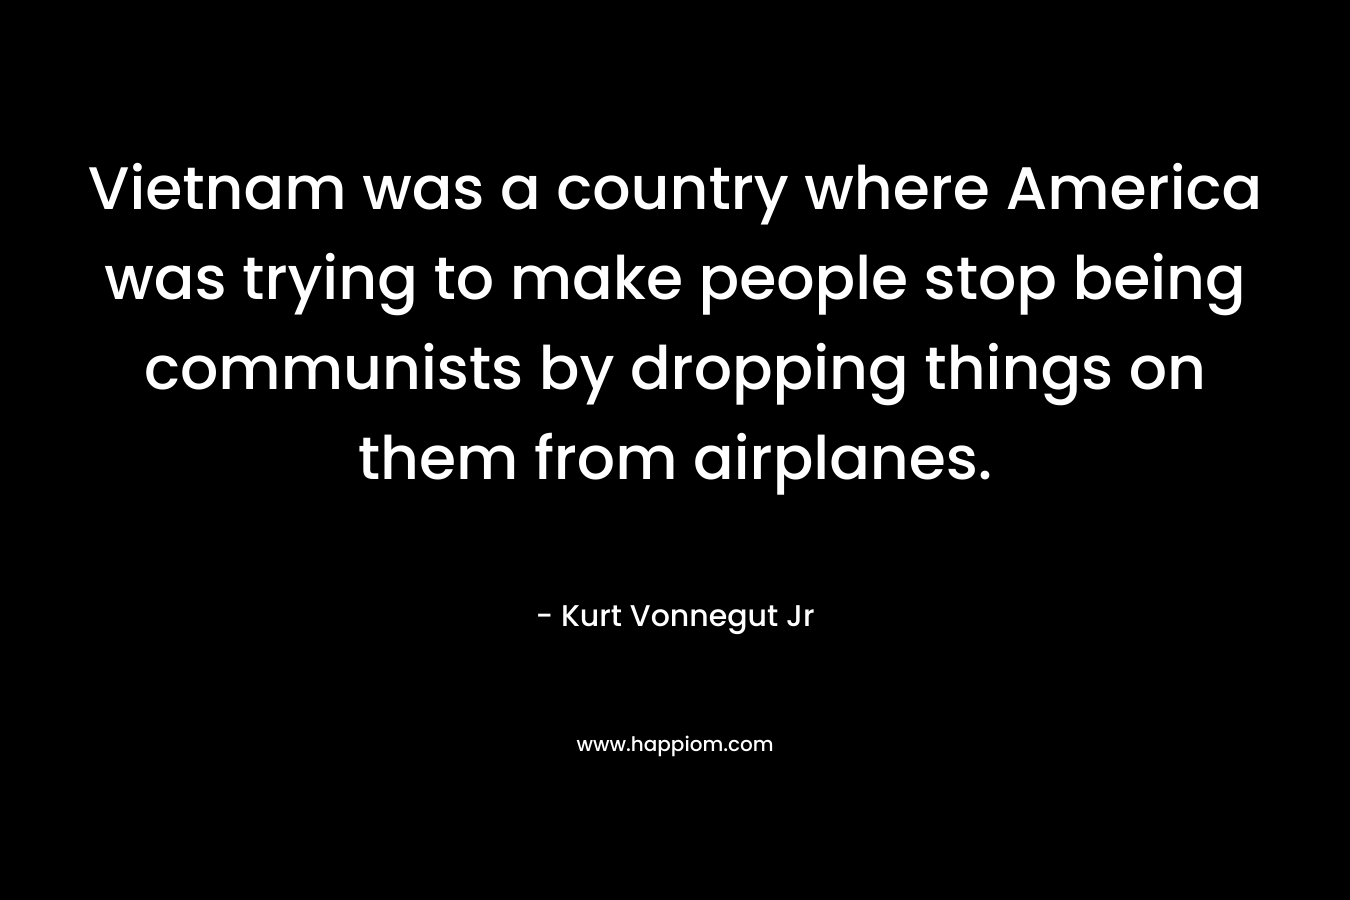 Vietnam was a country where America was trying to make people stop being communists by dropping things on them from airplanes. – Kurt Vonnegut Jr